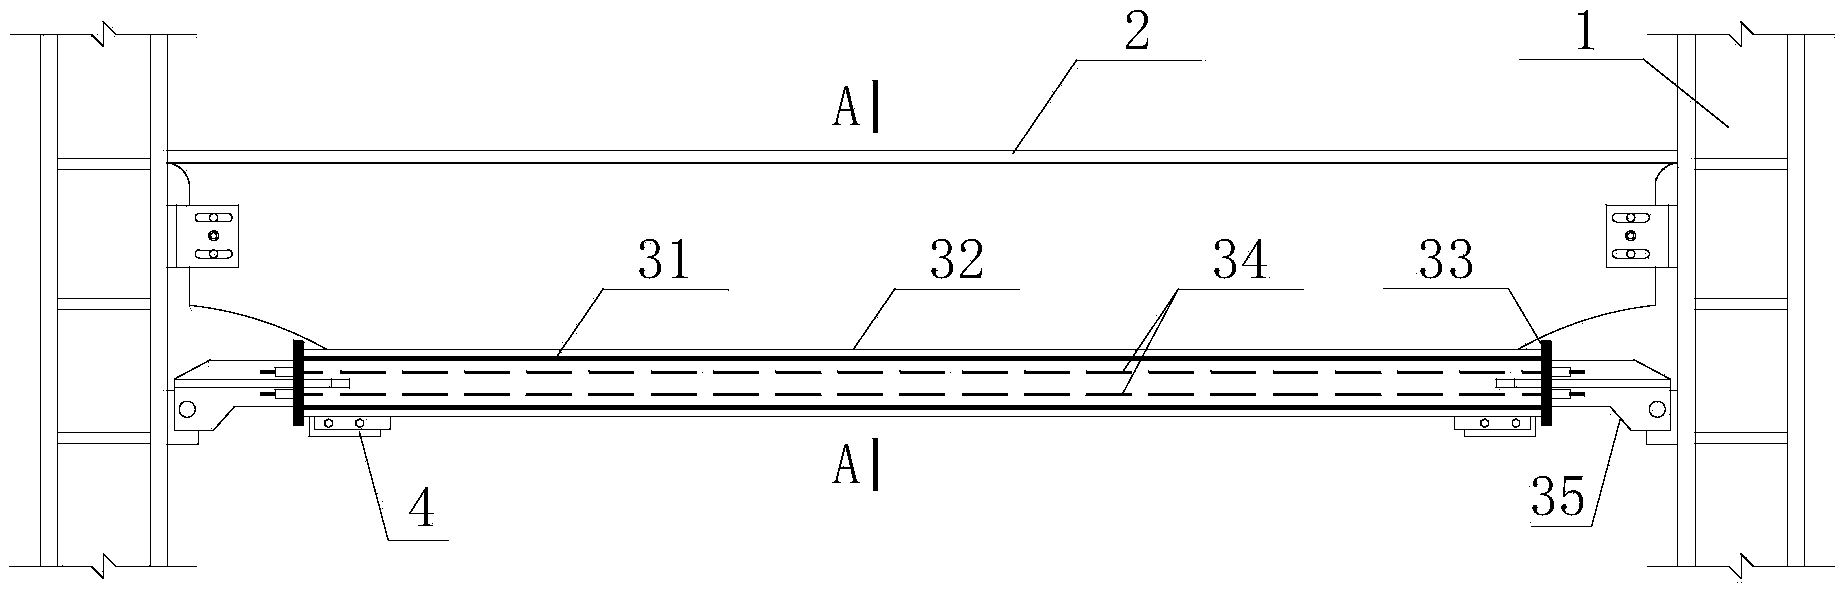 Post-tensioning prestress type self-centering steel frame structure